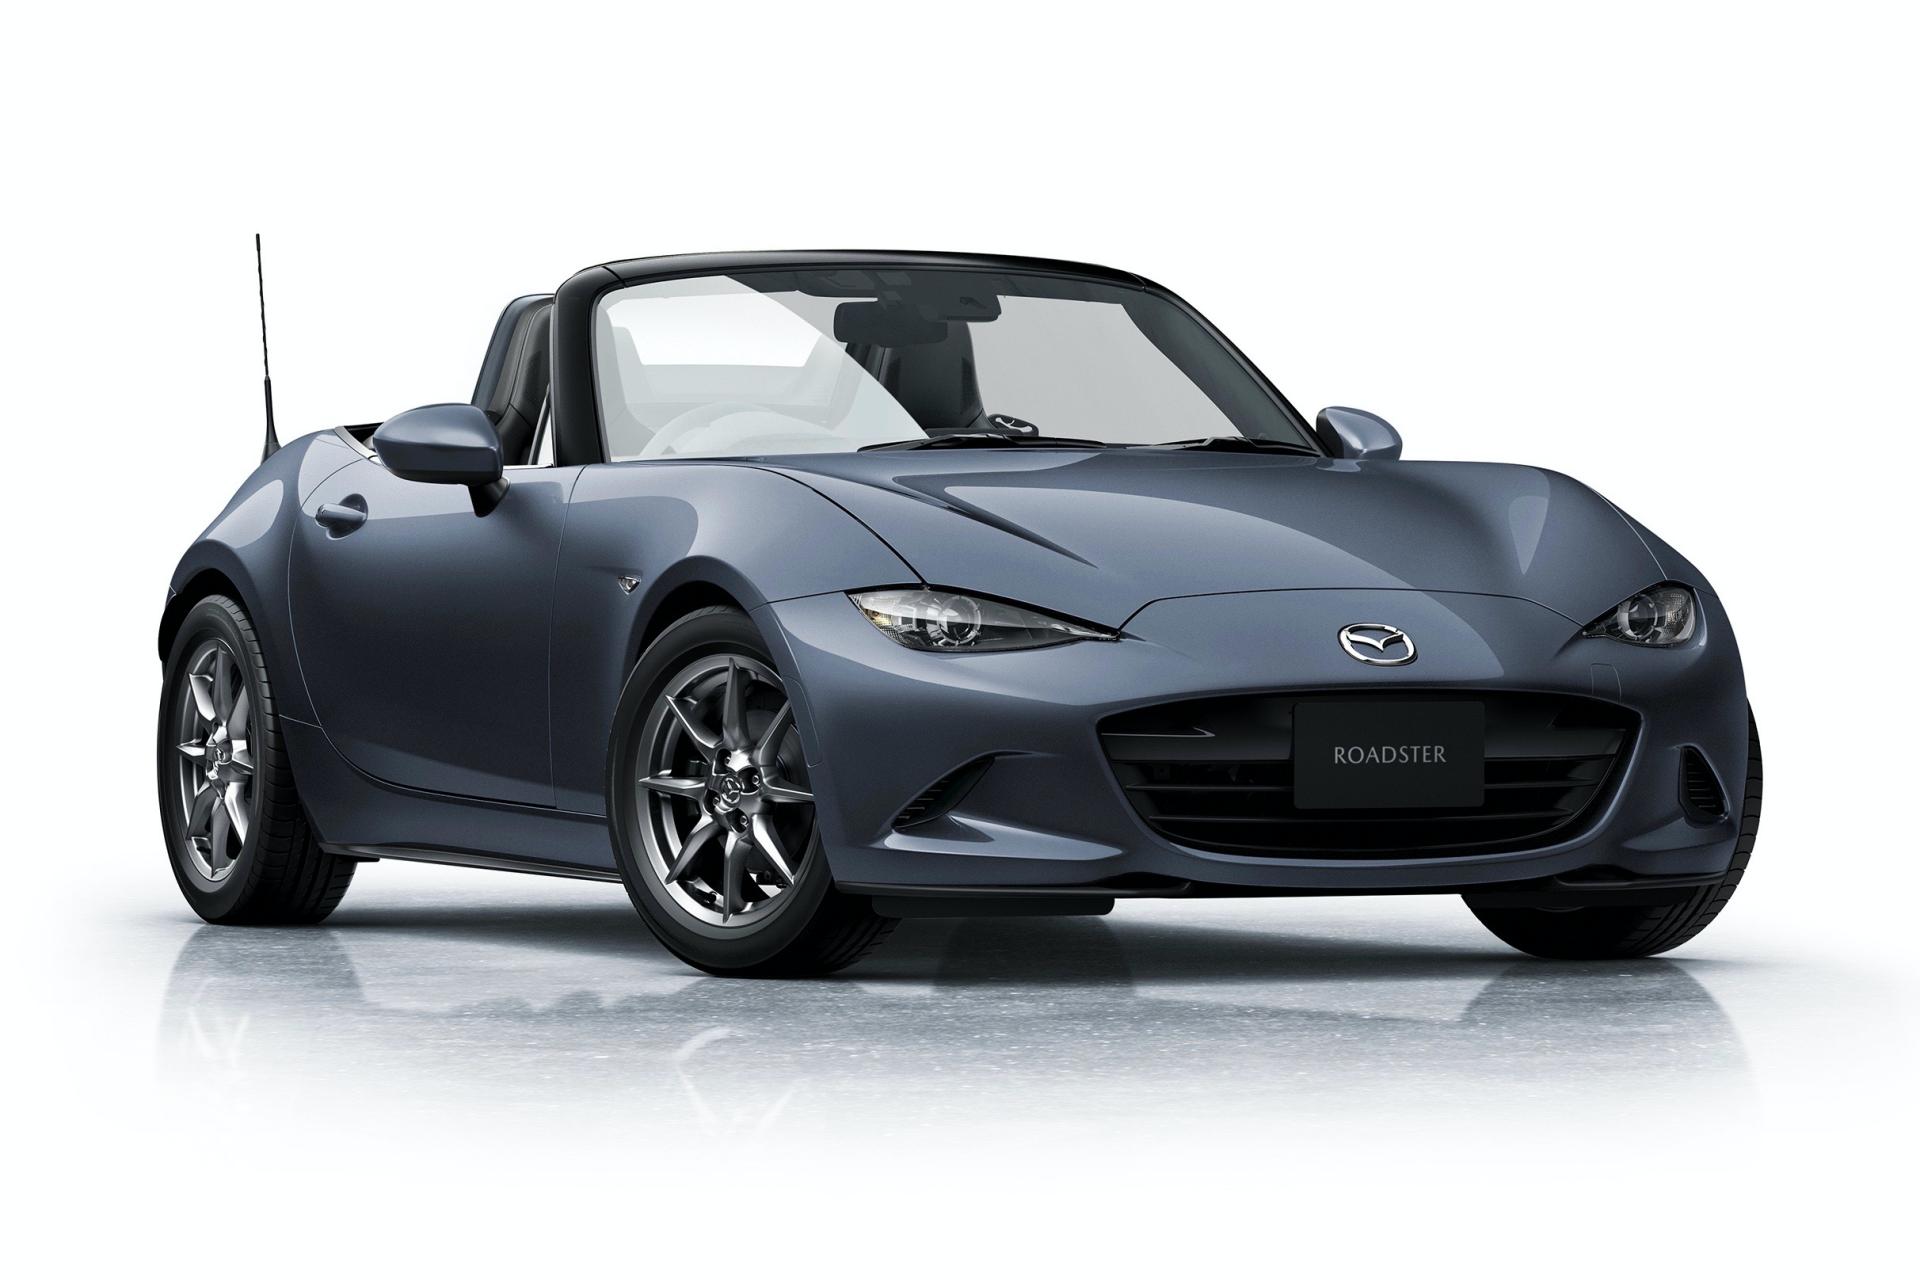 mazda-mx-5-dong-xe-the-thao-chat-luong-an-tuong